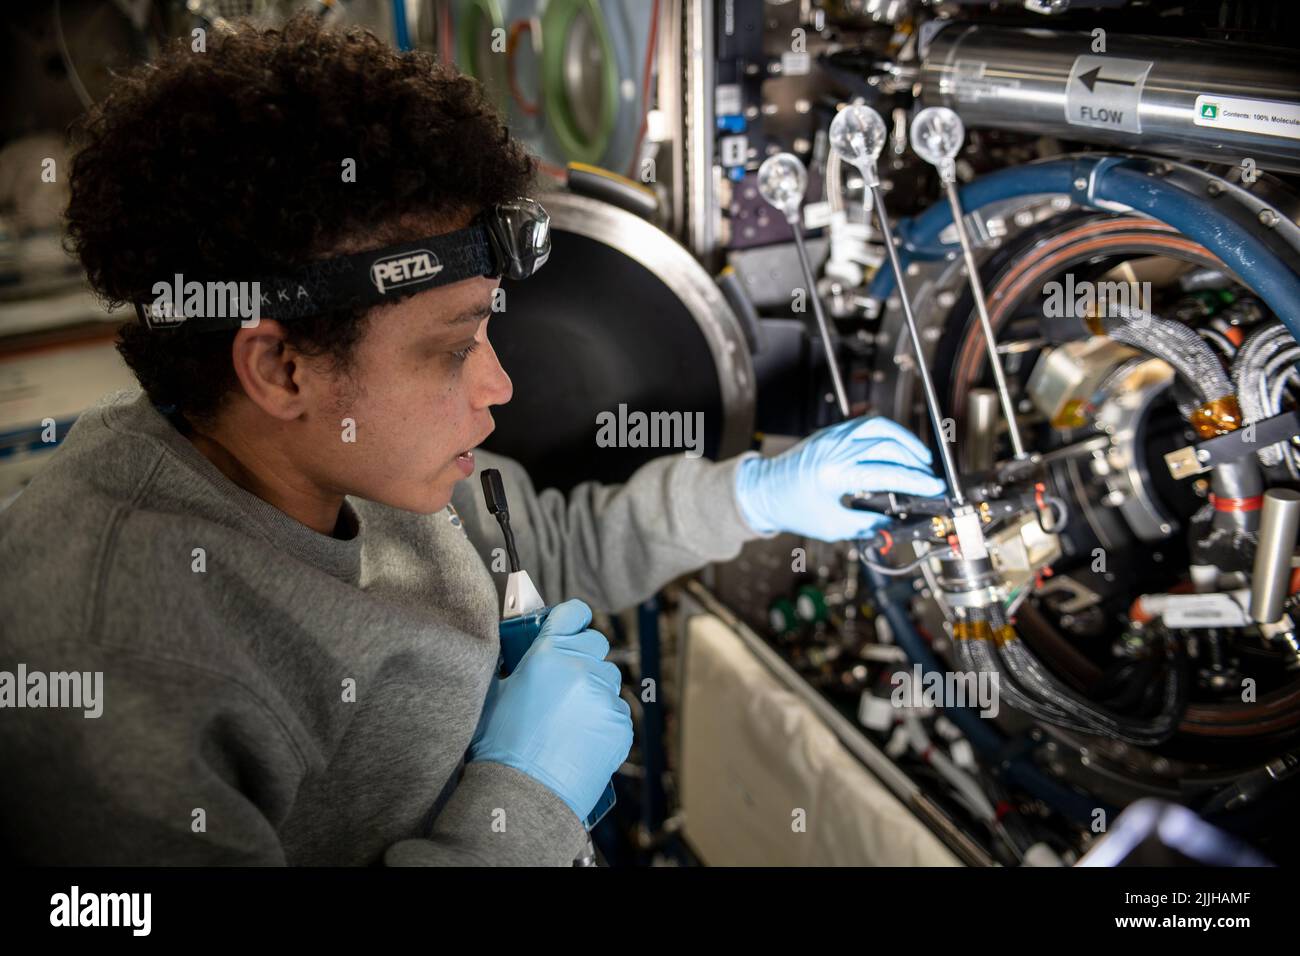 NASA astronaut and Expedition 67 Flight Engineer Jessica Watkins services components that support the Solid Fuel Ignition and Extinction fire safety experiment inside the Combustion Integrated Rack of the Destiny Laboratory Module onboard the International Space Station, June 24, 2022 in Earth Orbit. Stock Photo